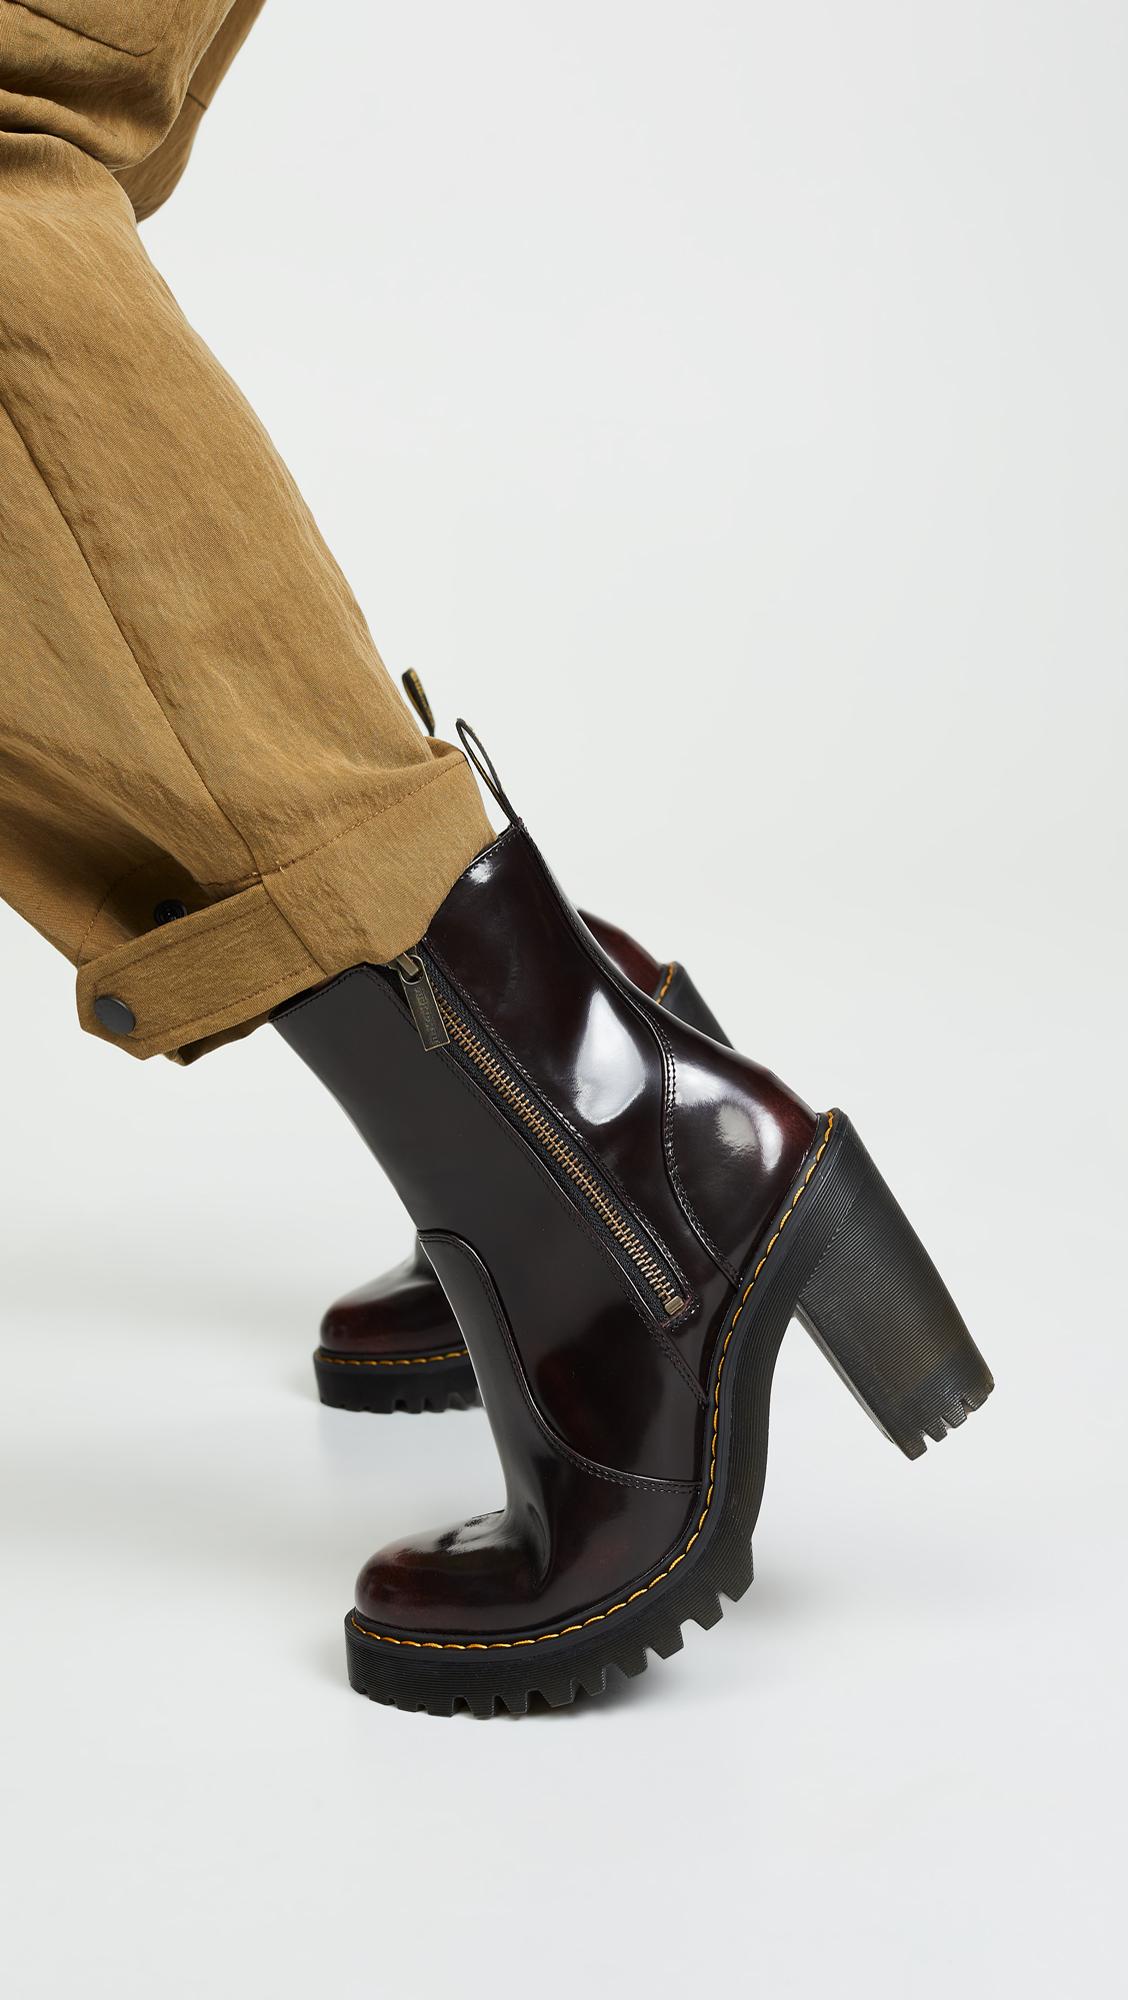 Dr. Martens Leather Magdalena Ii Ankle Boots in Cherry Red (Black) - Lyst